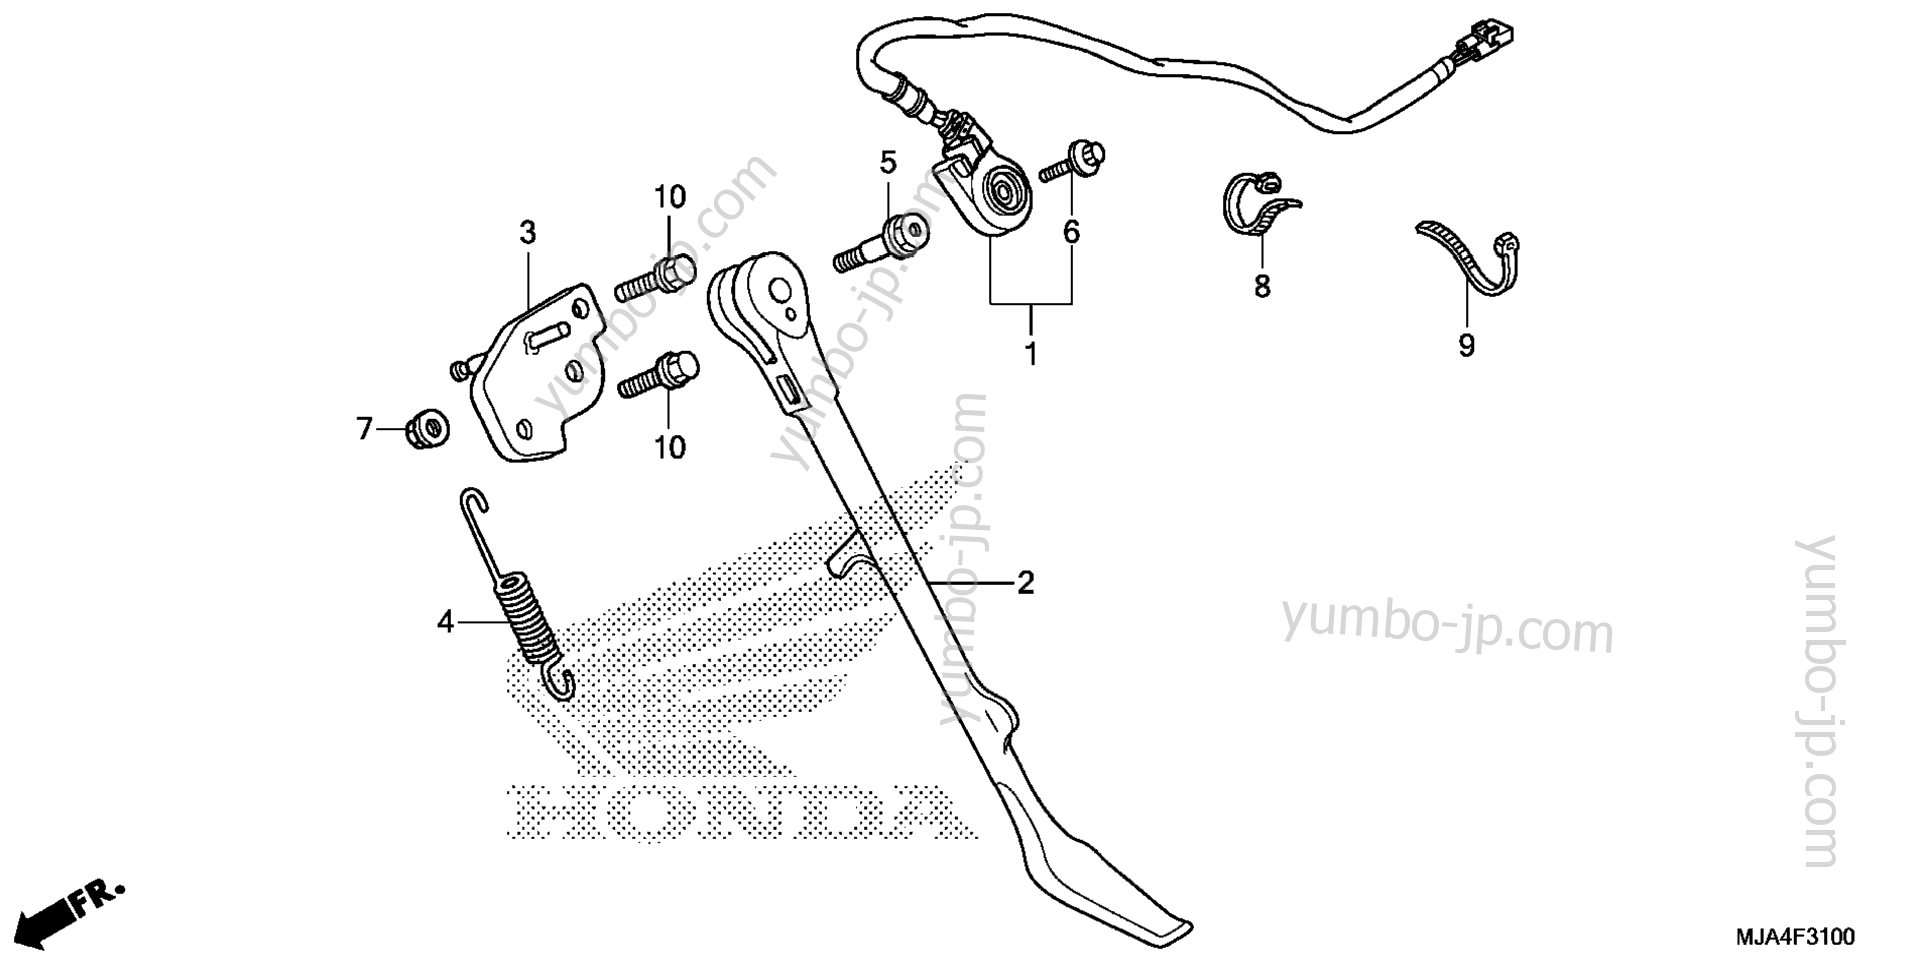 SIDE STAND (1) for motorcycles HONDA VT750C2 A 2012 year